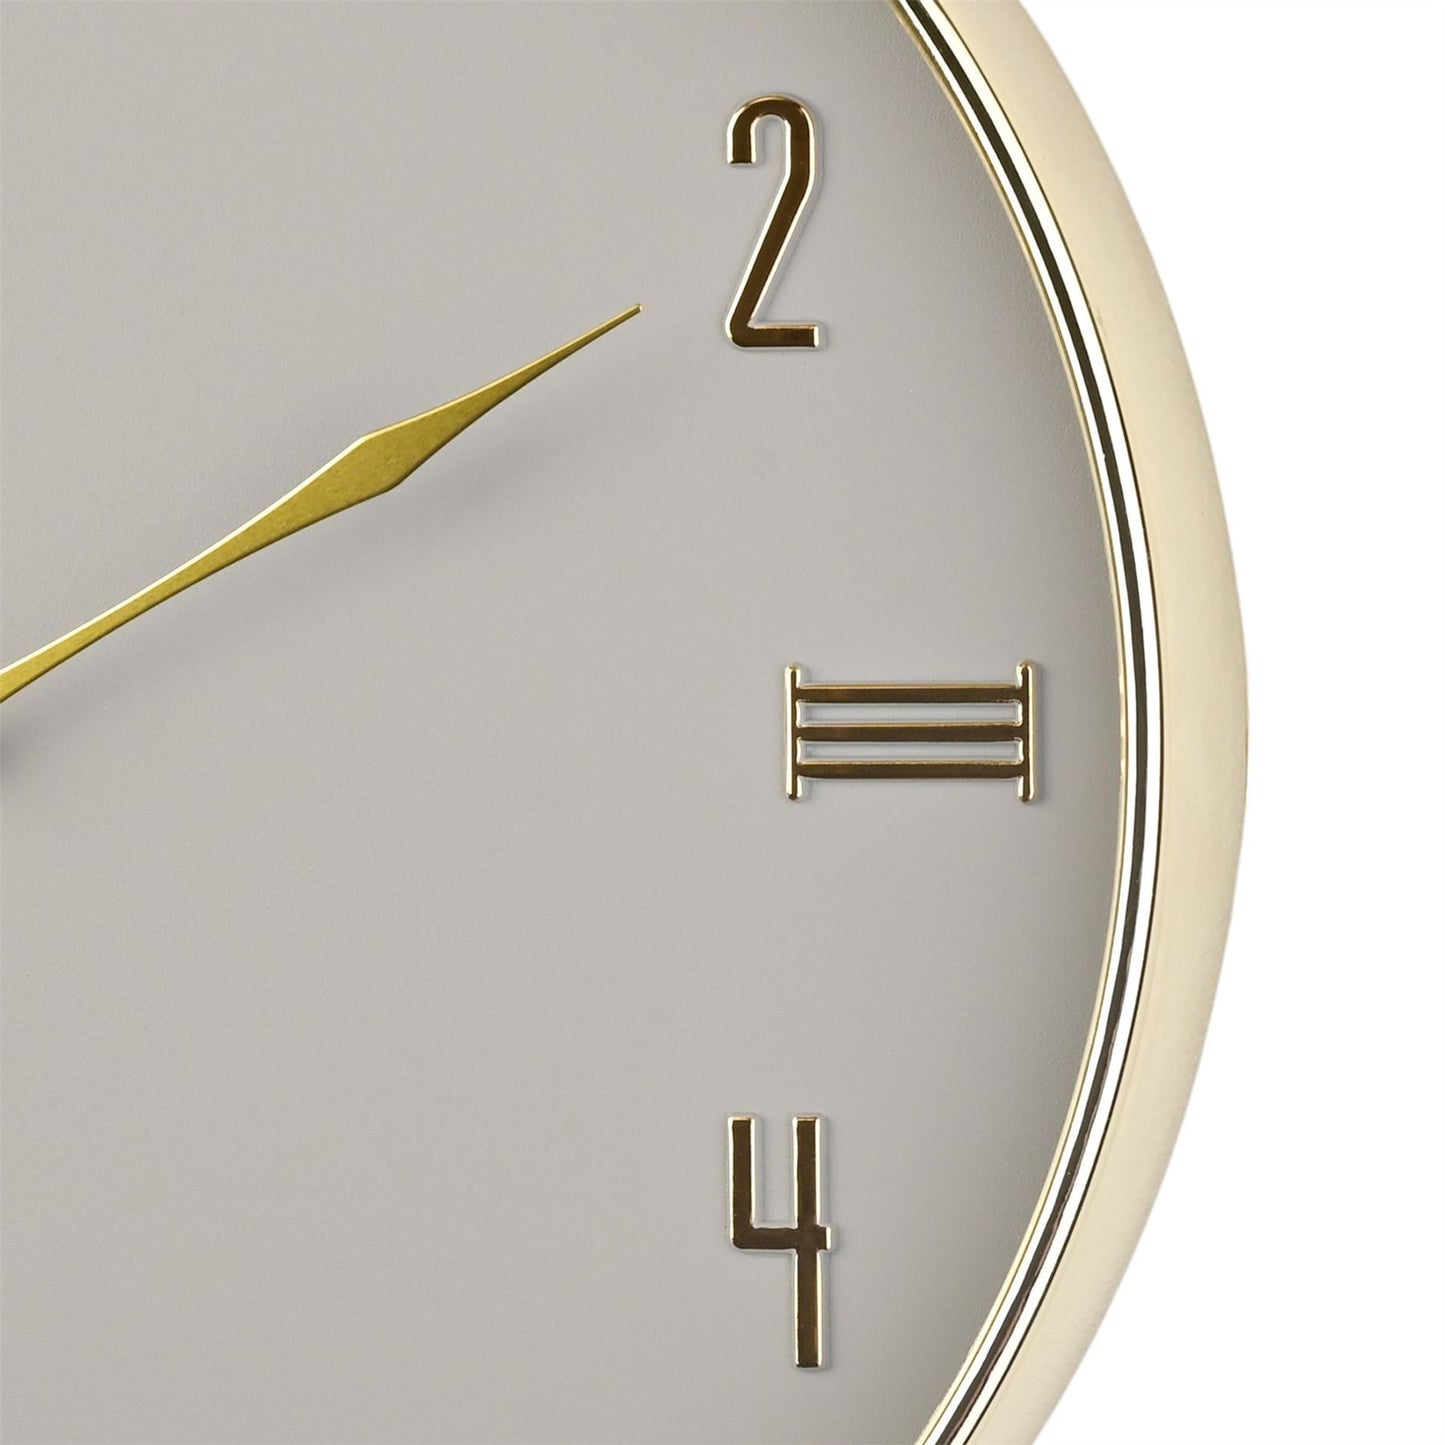 Hometime Round Wall Clock Grey & Gold